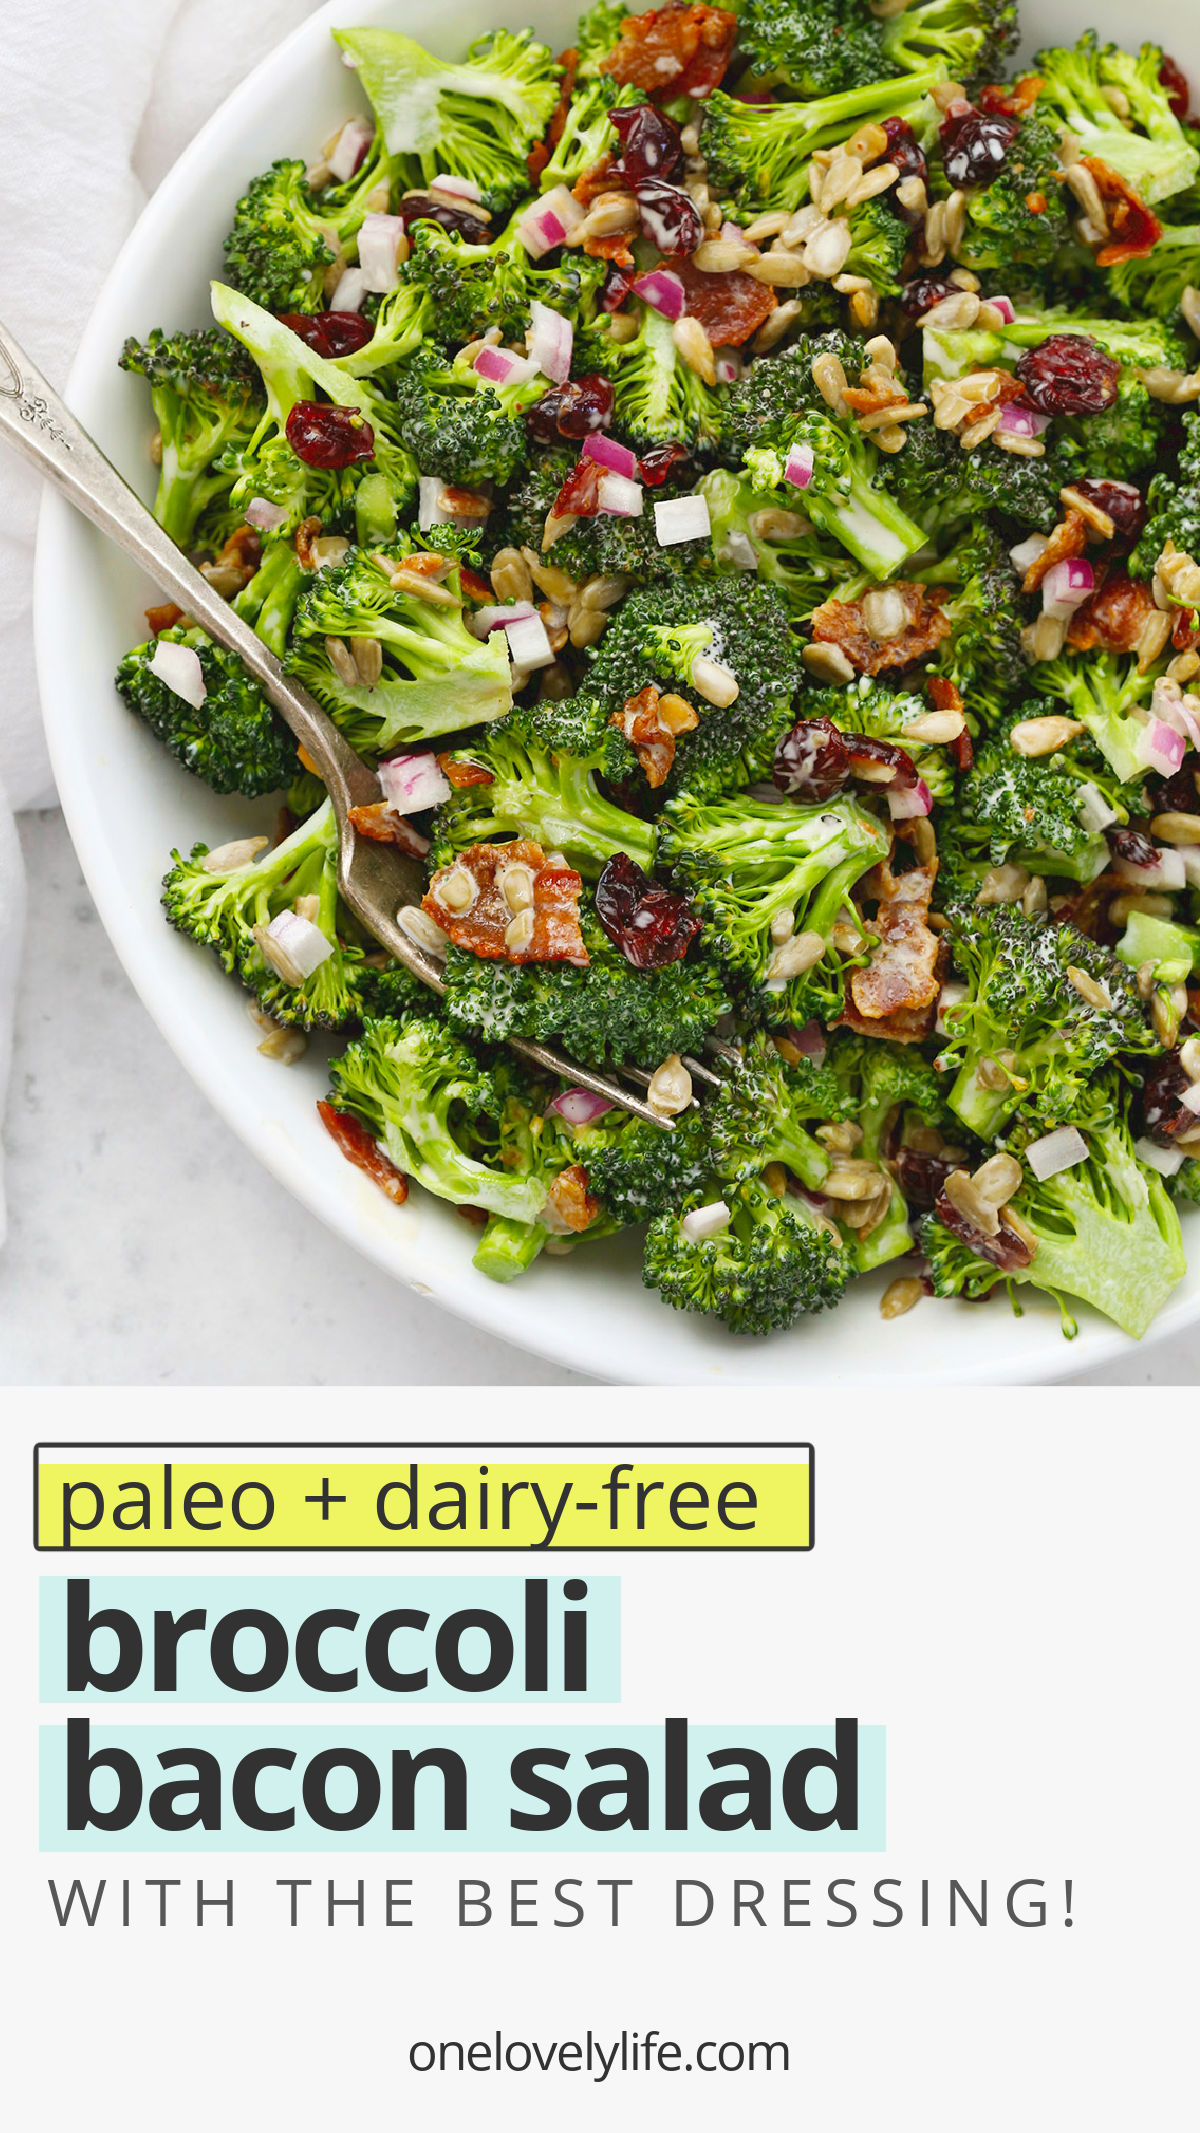 Broccoli Bacon Salad - This classic broccoli salad is one of my favorite summer salads for barbecues, picnics, and potlucks. (Gluten-Free, Paleo-Friendly) // Paleo Broccoli Salad // Gluten-Free Broccoli Salad // Summer Side Dish // Broccoli Salad Dressing // Creamy Broccoli Salad // broccoli salad with bacon // BBQ side dish // summer salad // potluck salad